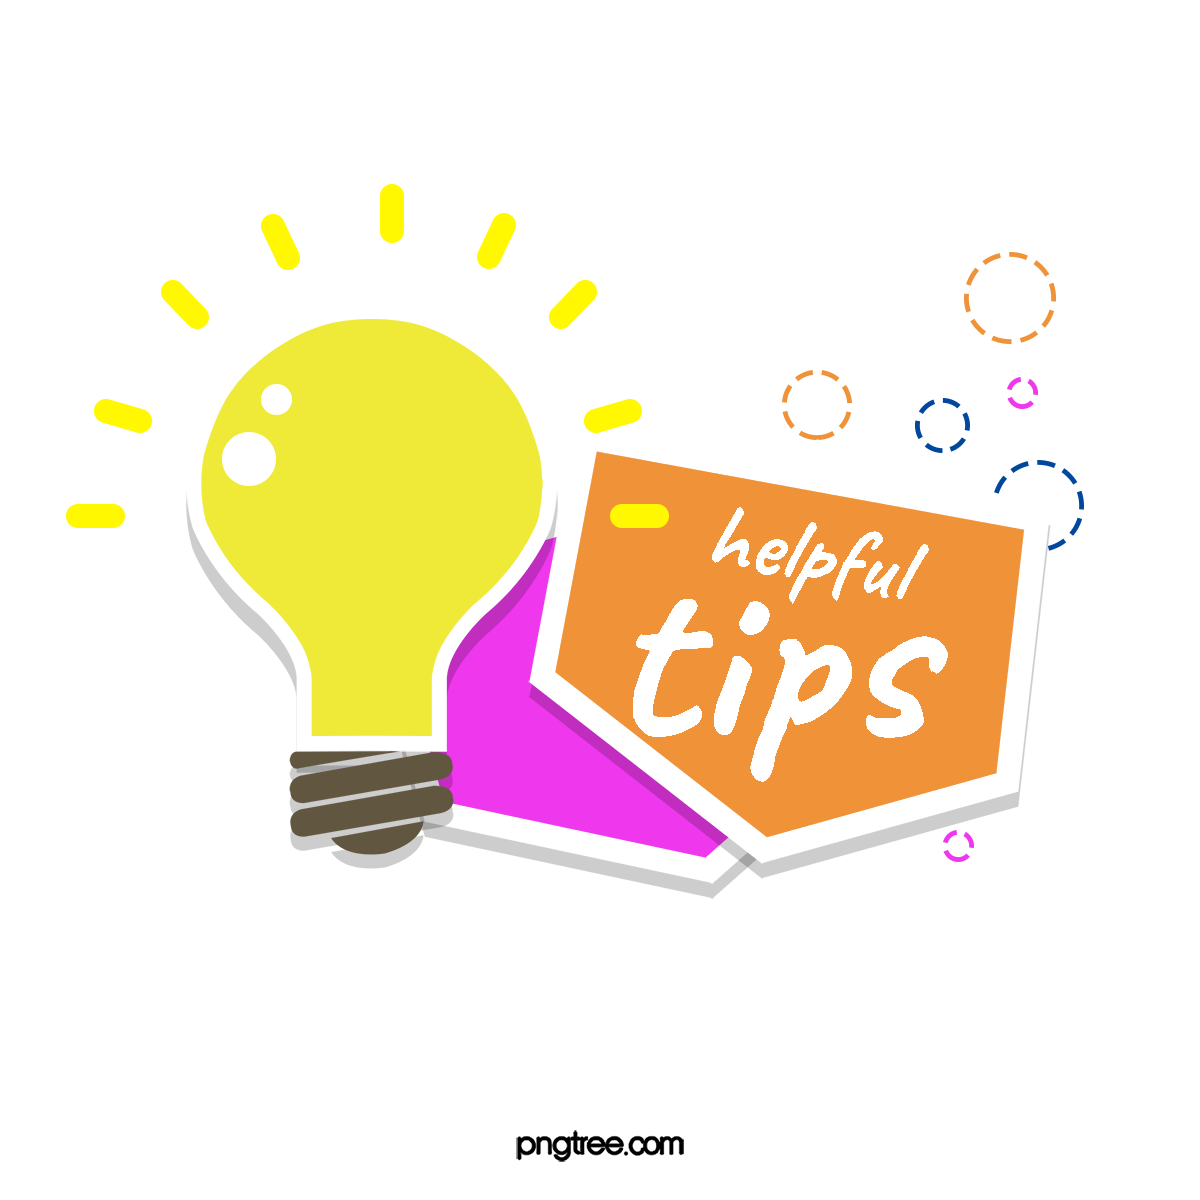 _Pngtree_lightbulb_helpful_tip_icon_5329659.png